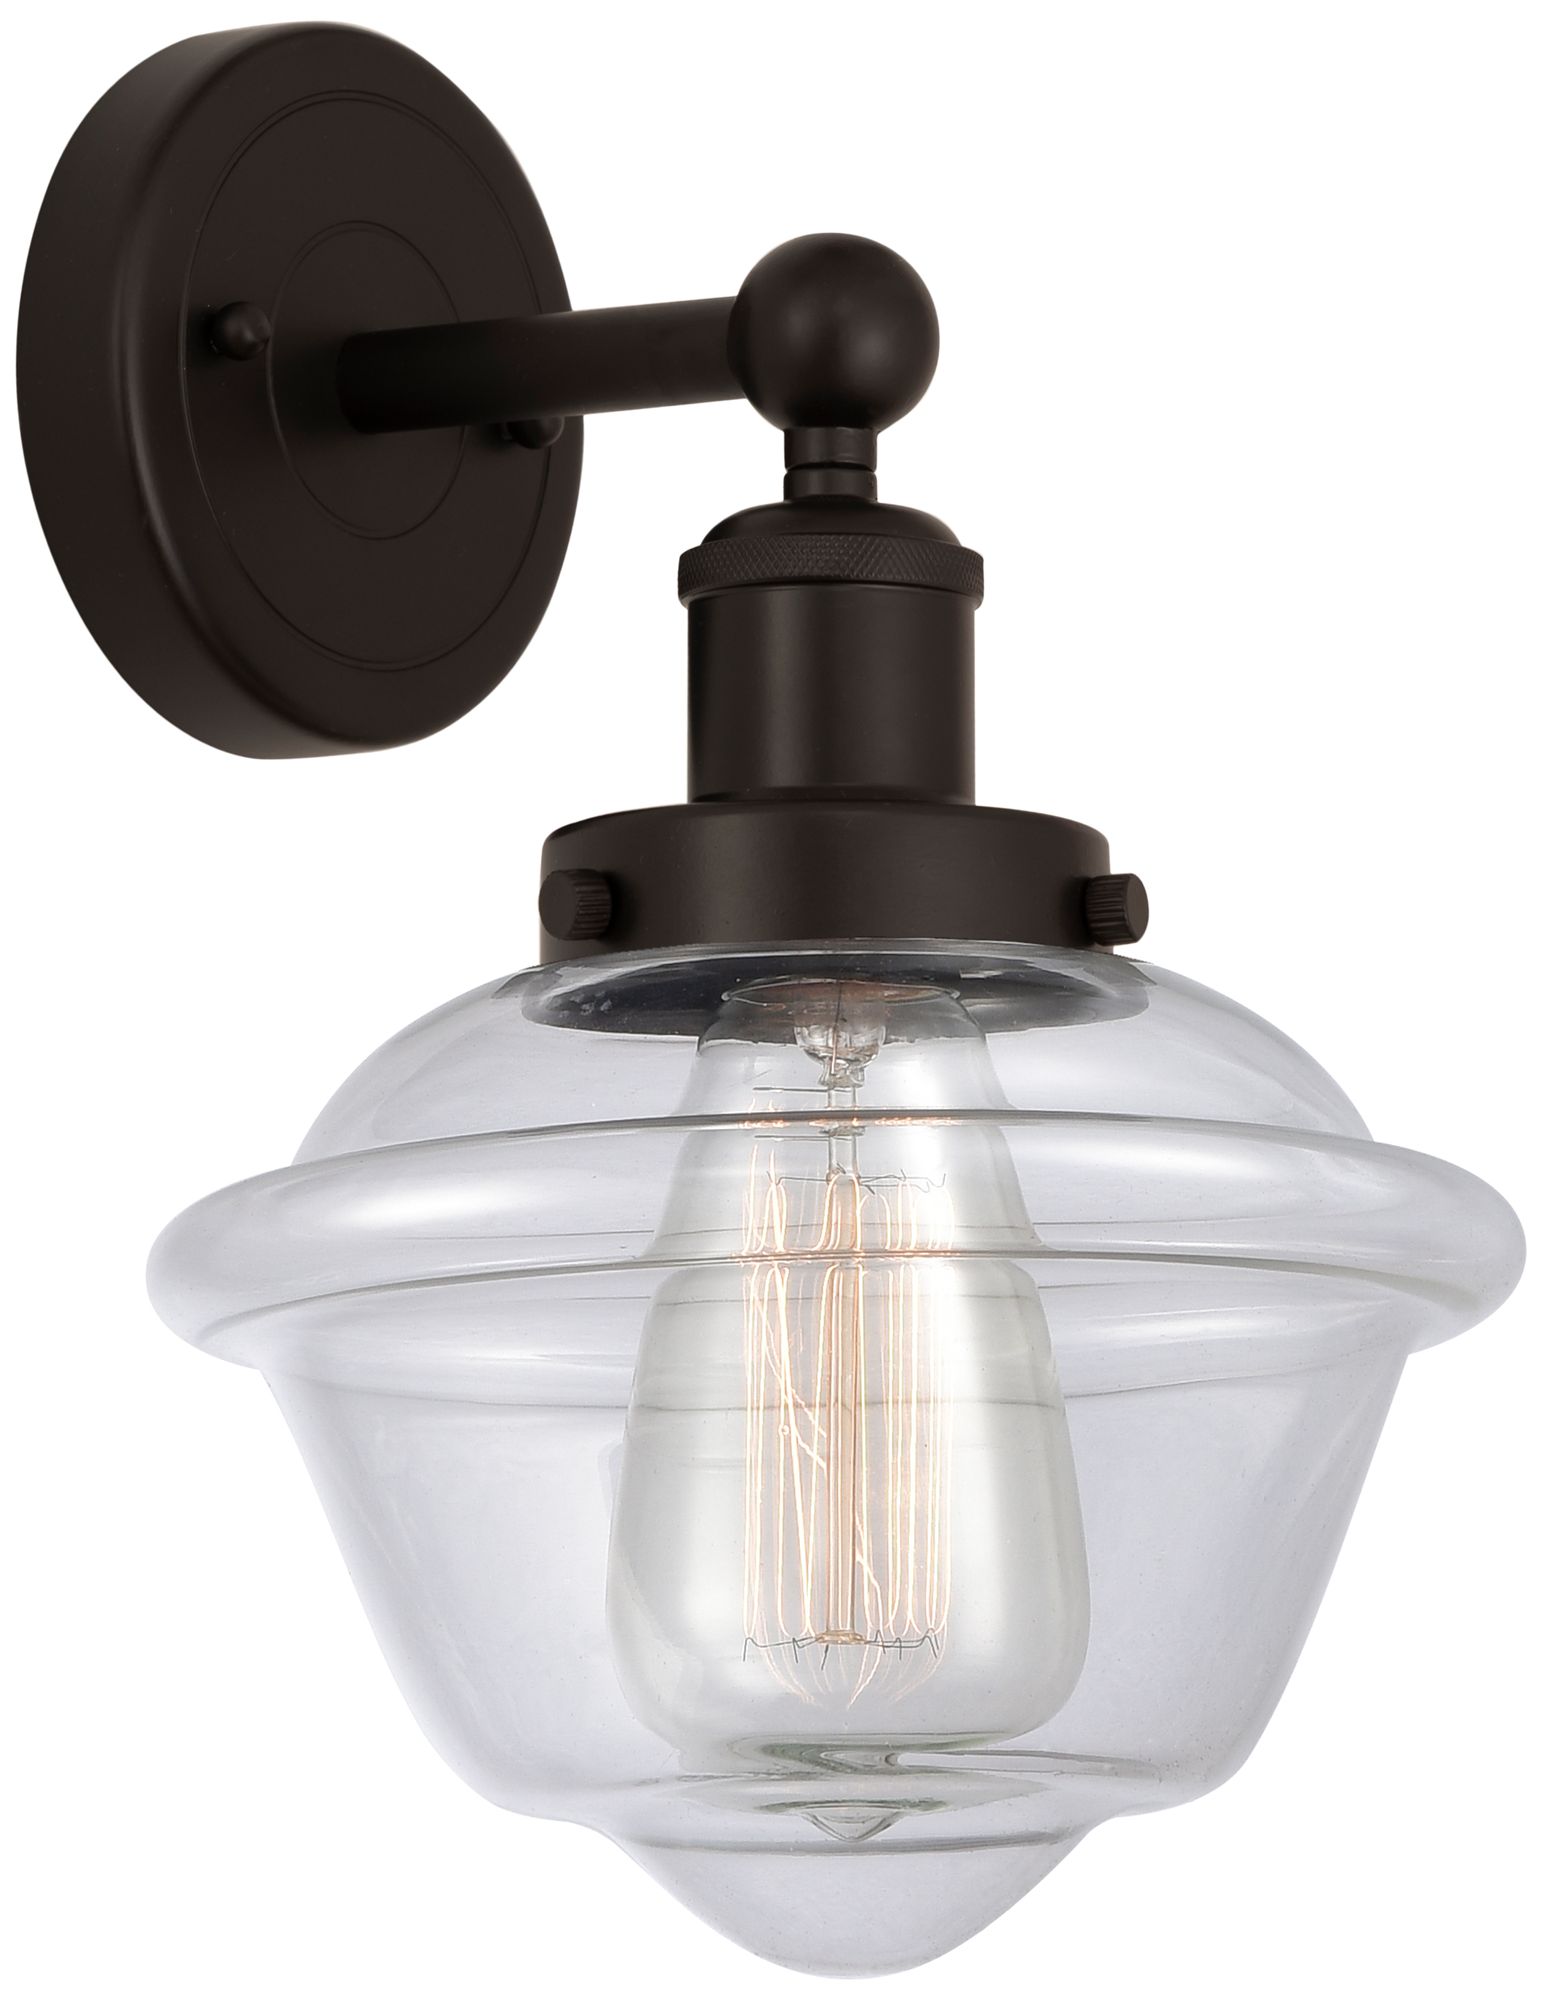 Edison Oxford 7" Oil Rubbed Bronze Sconce w/ Clear Shade